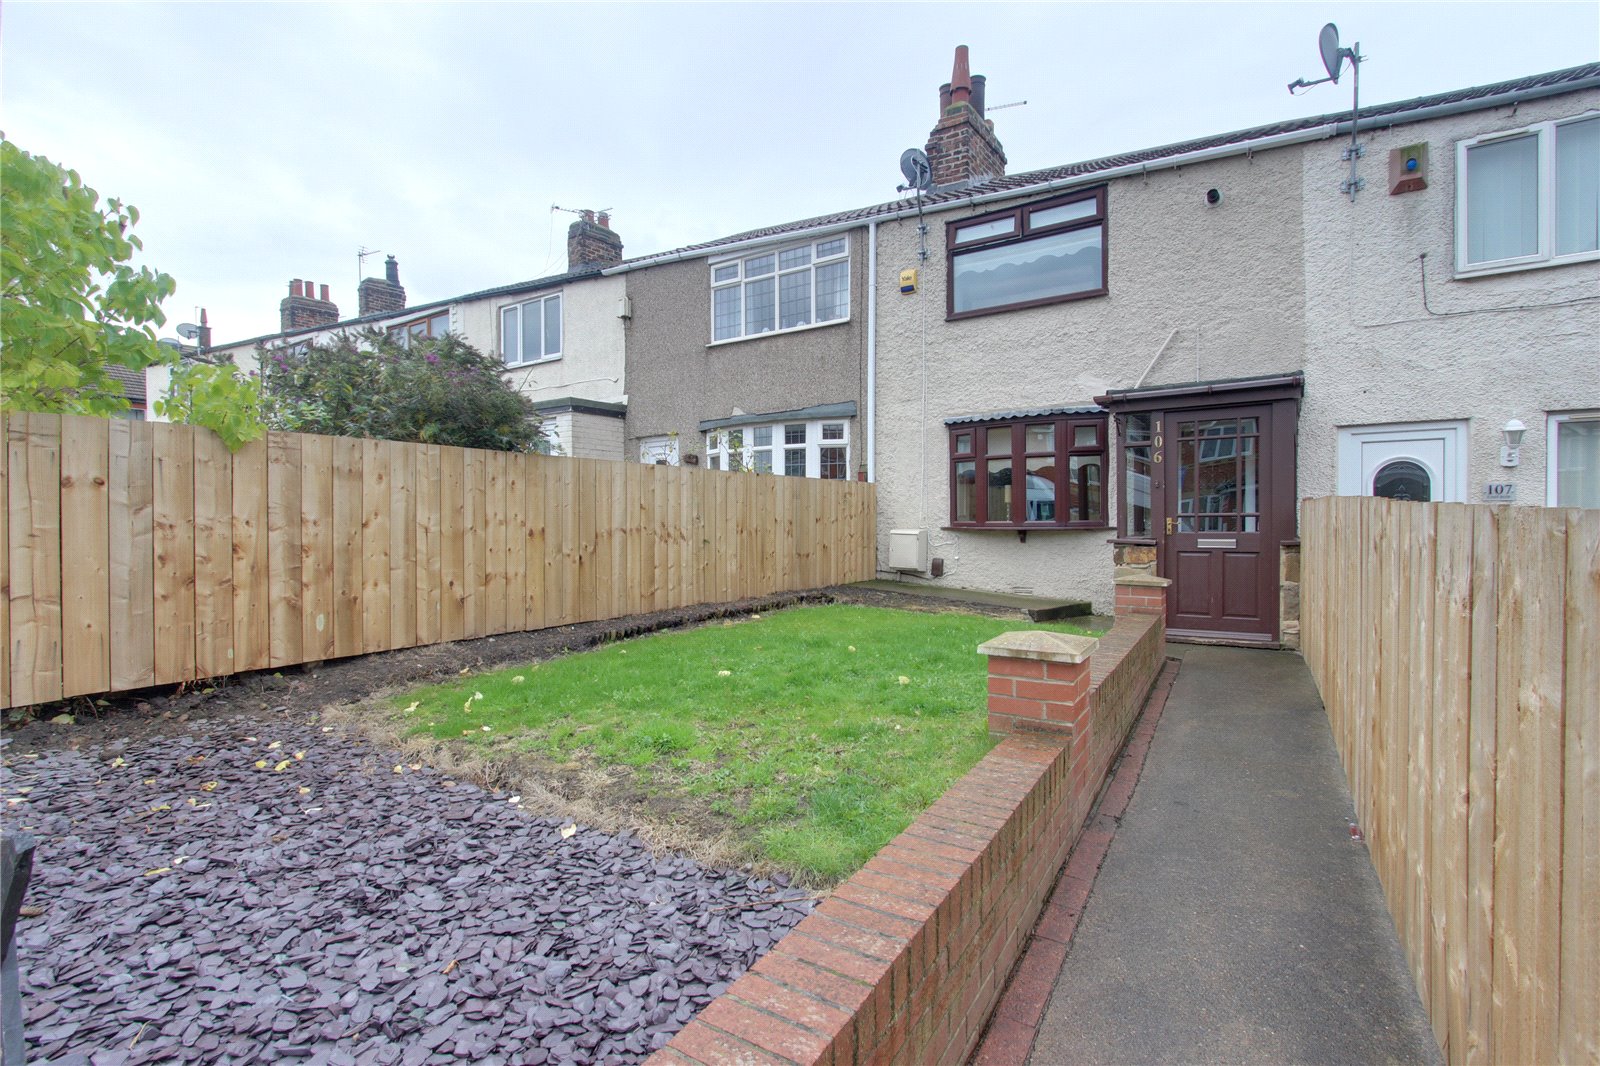 2 bed house for sale in East Row, Eston - Property Image 1